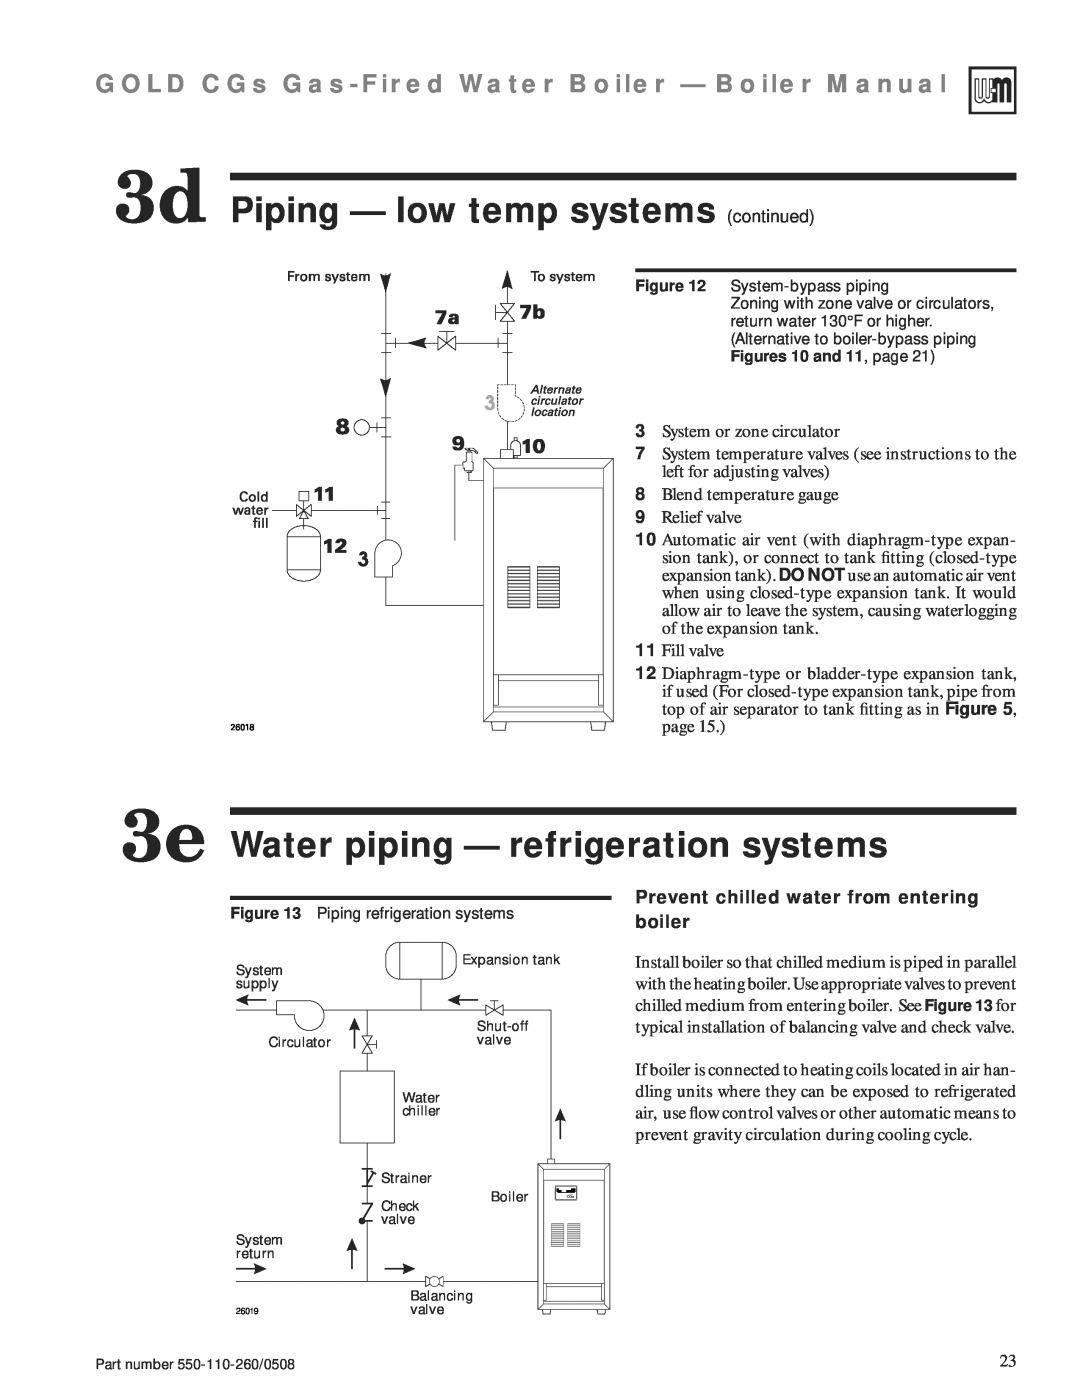 Weil-McLain 550-110-260/0508 manual 3e Water piping — refrigeration systems, 3d Piping — low temp systems continued, boiler 